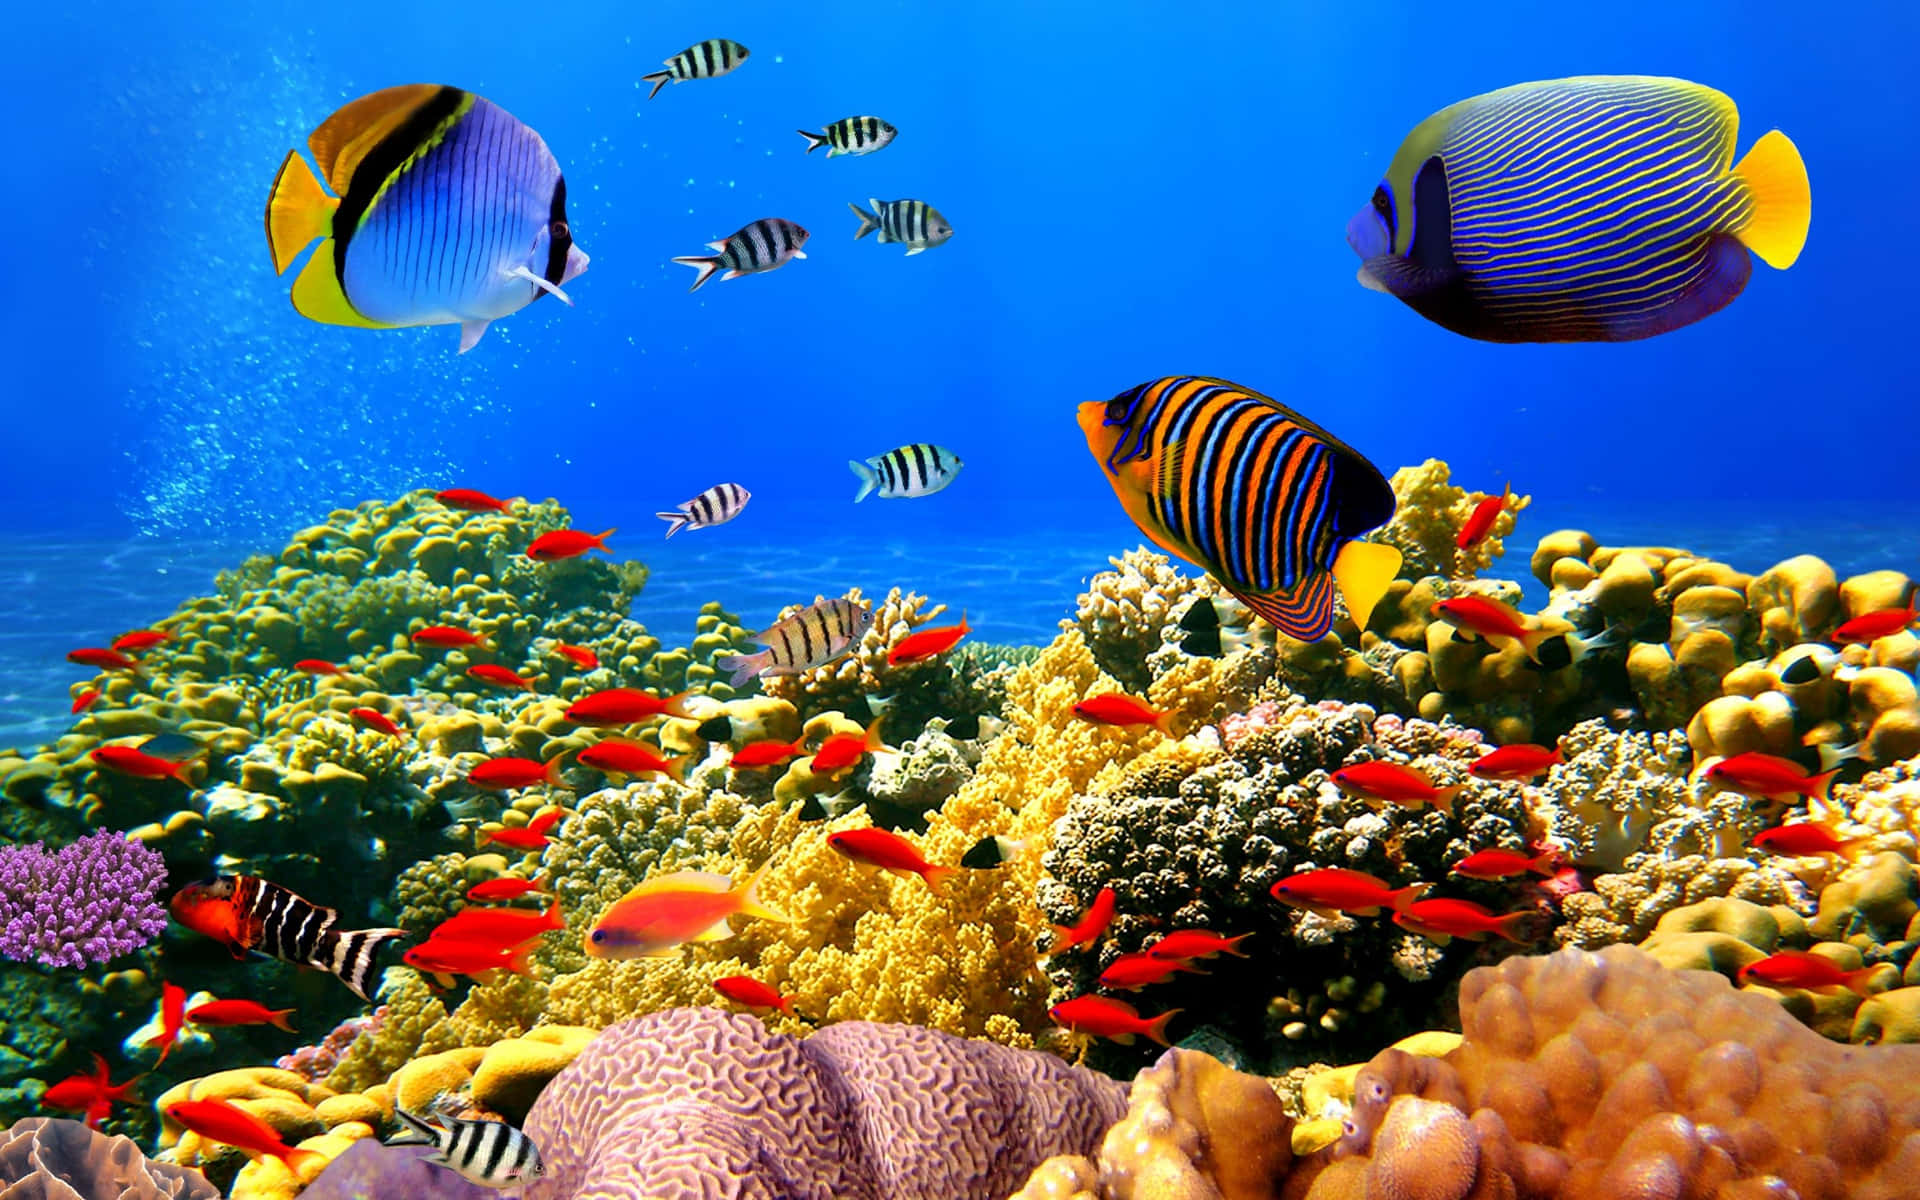 A mesmerizing array of coral, fish and other marine life found in a colorful coral reef ecosystem.